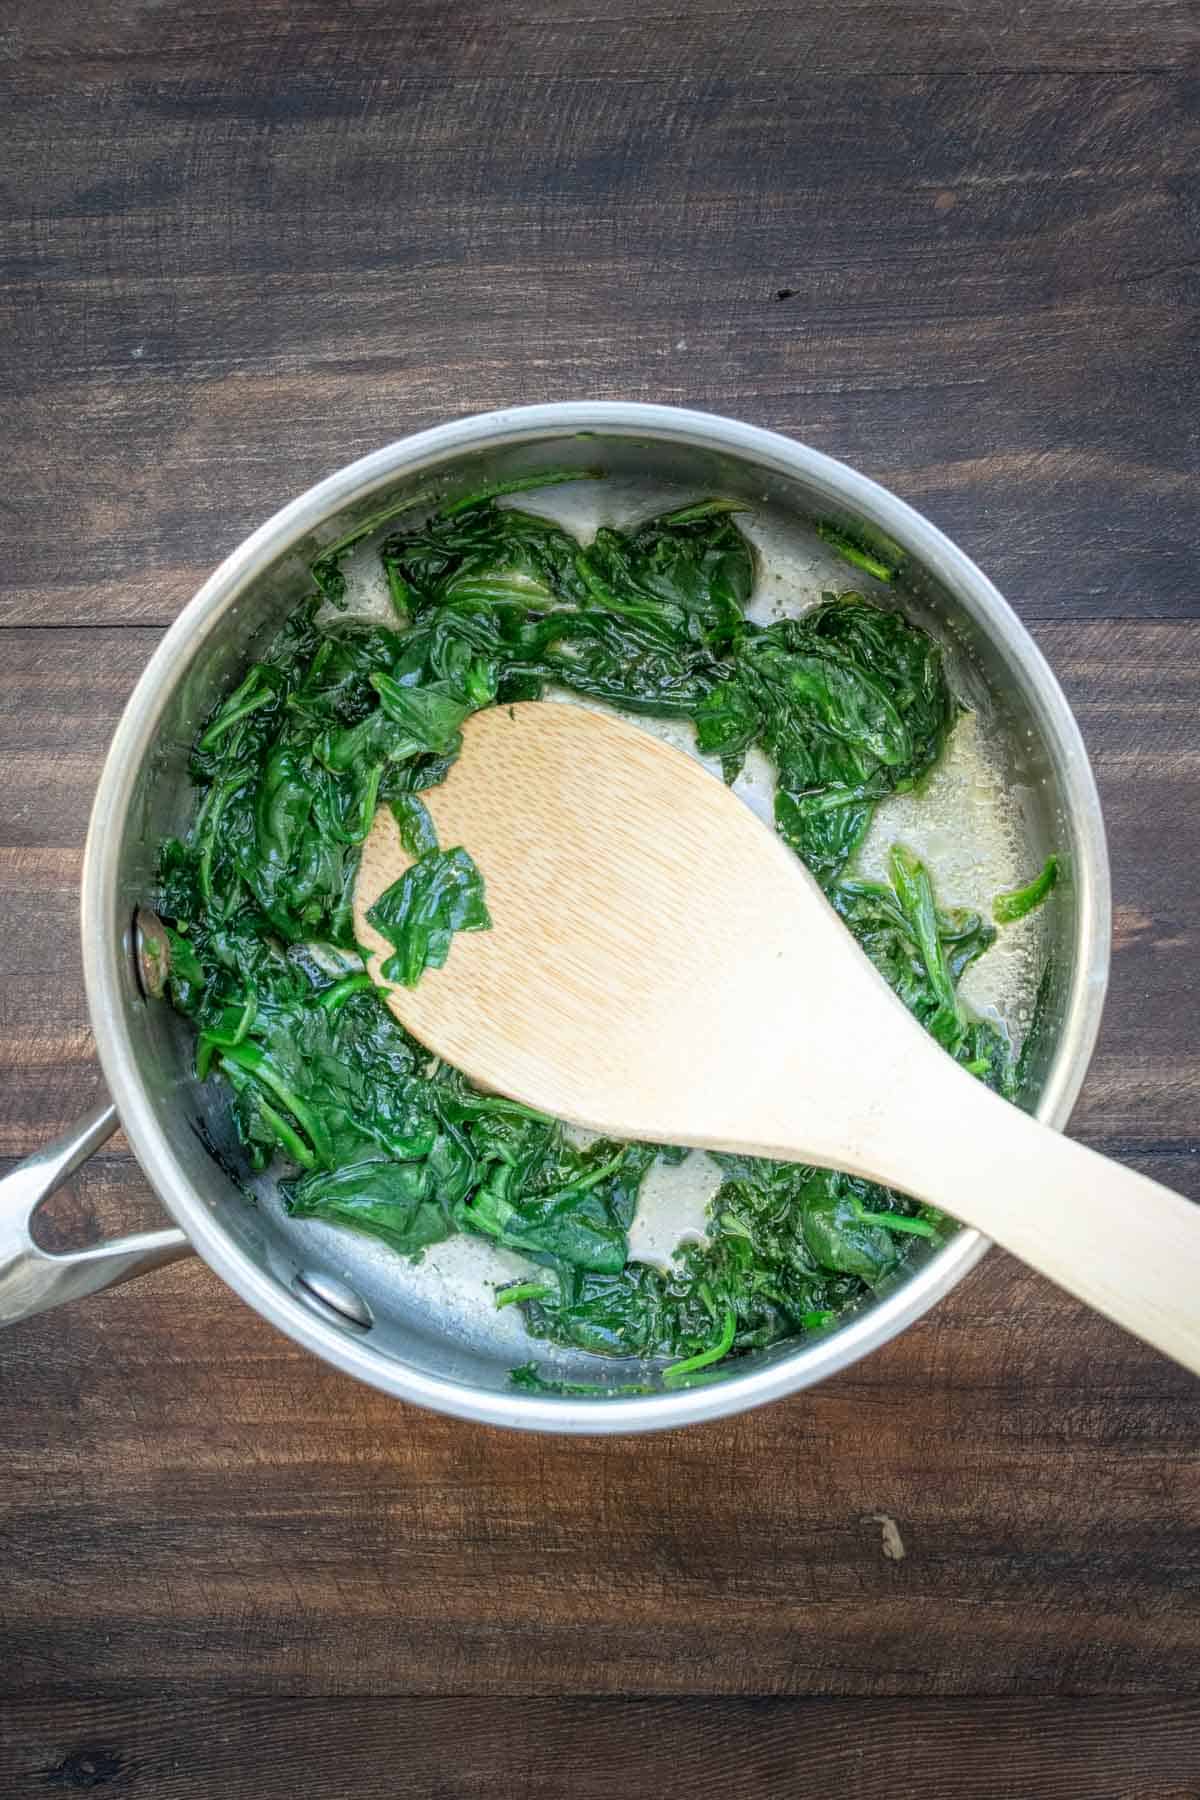 Spinach being sautéed with a wooden spoon in a metal pot